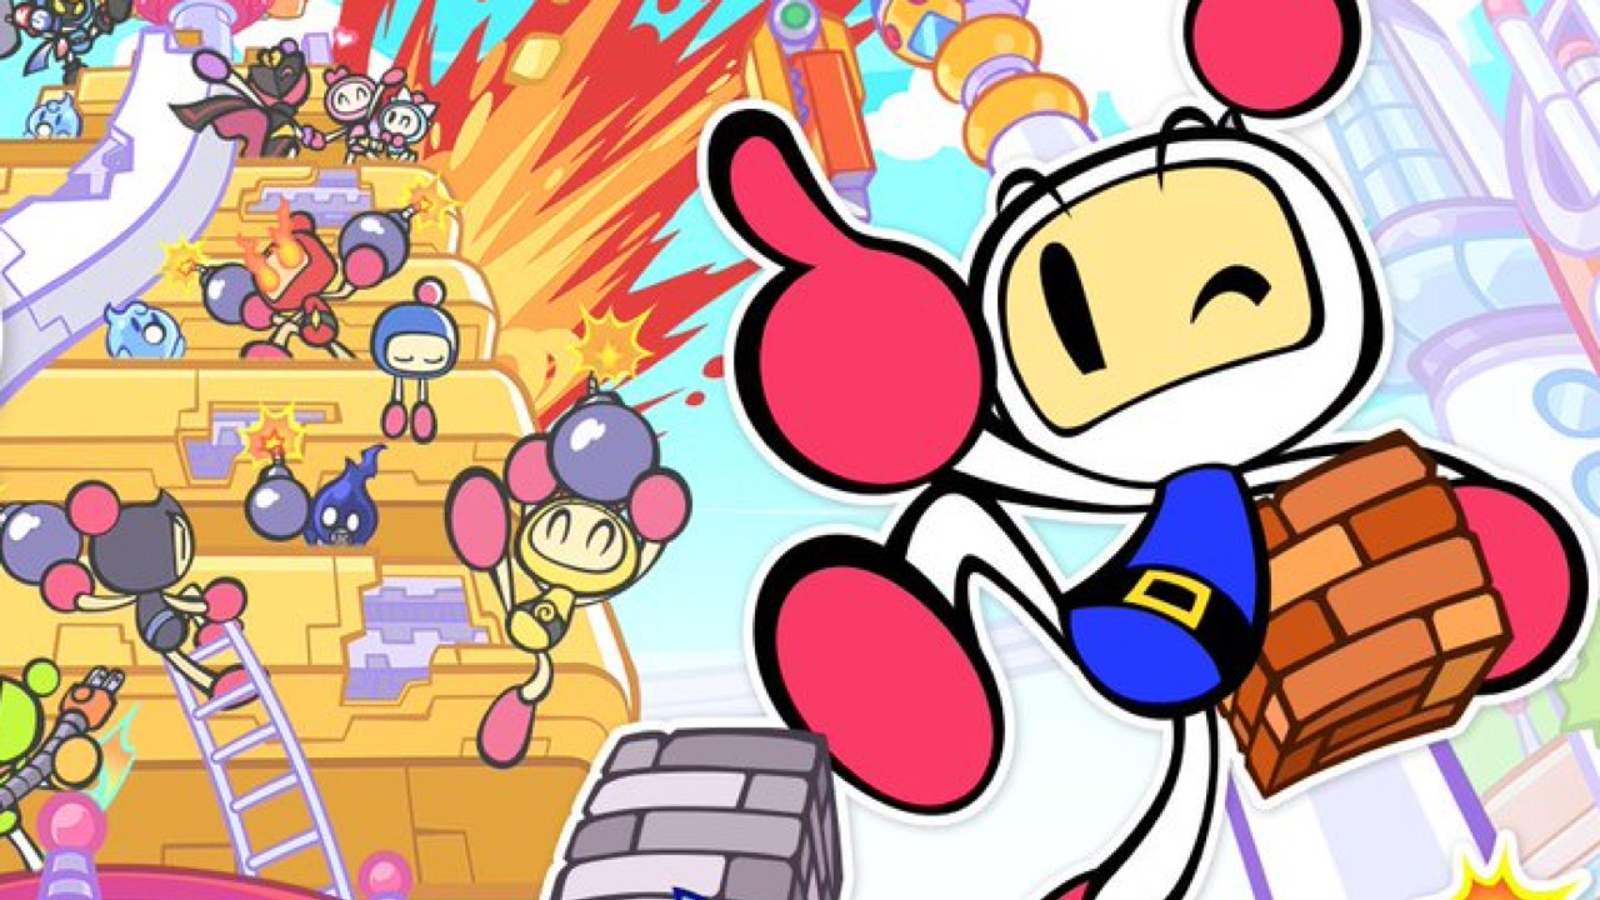 Super Bomberman R 2 hits PlayStation, Xbox, Switch, and PC this September